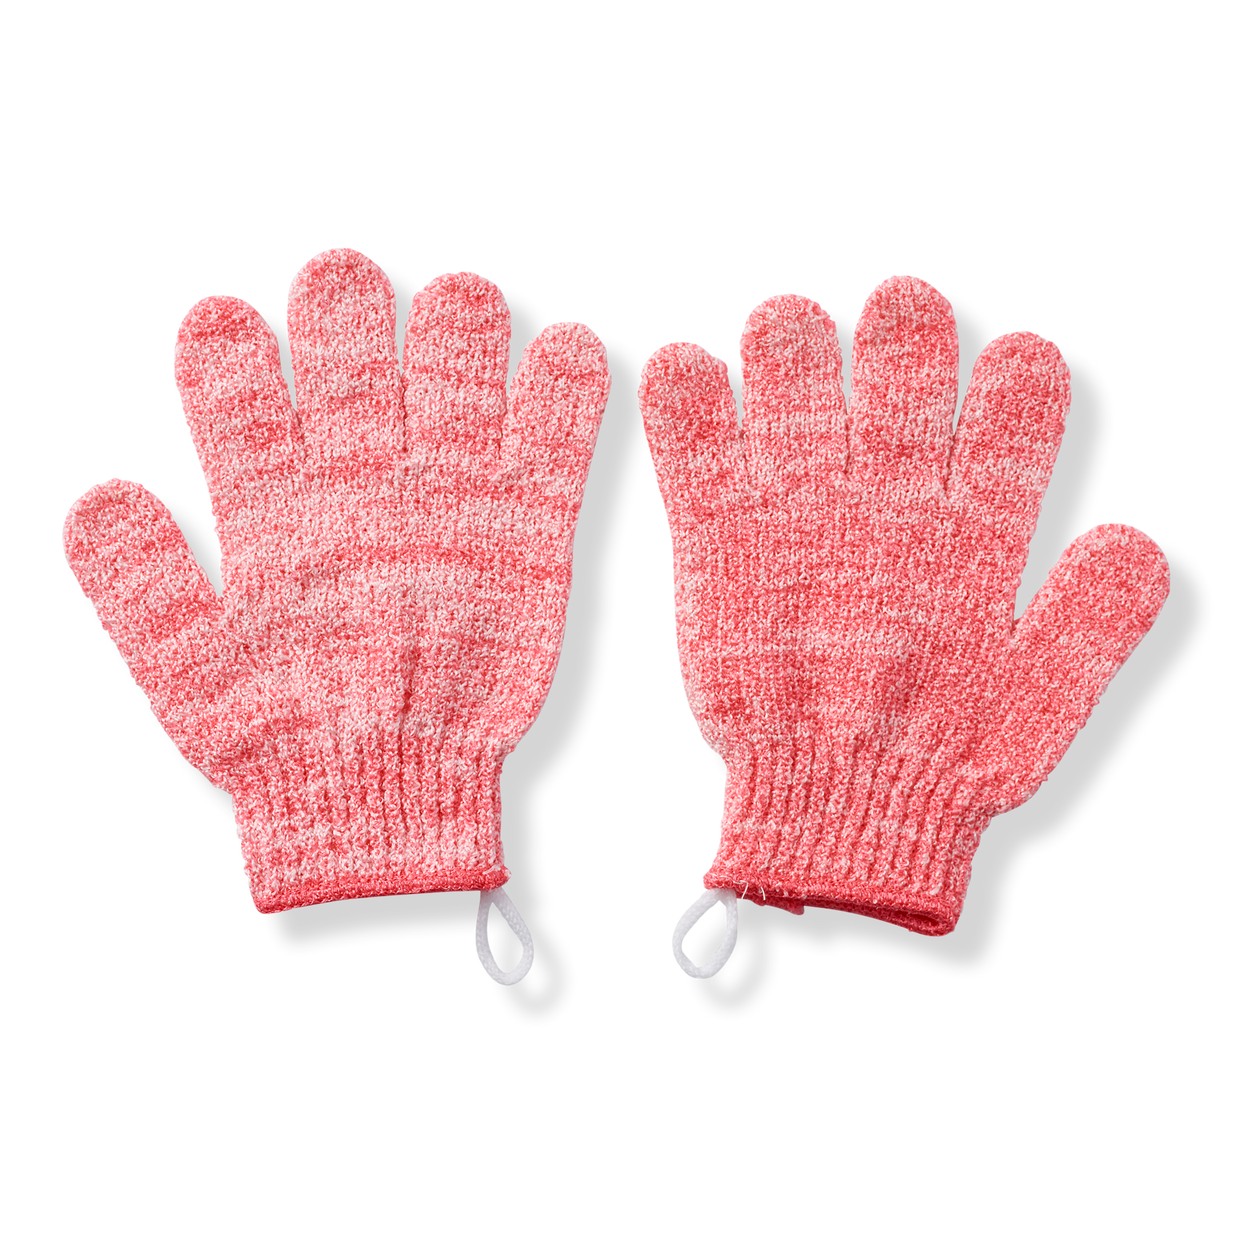 Find more Chanel Gloves for sale at up to 90% off